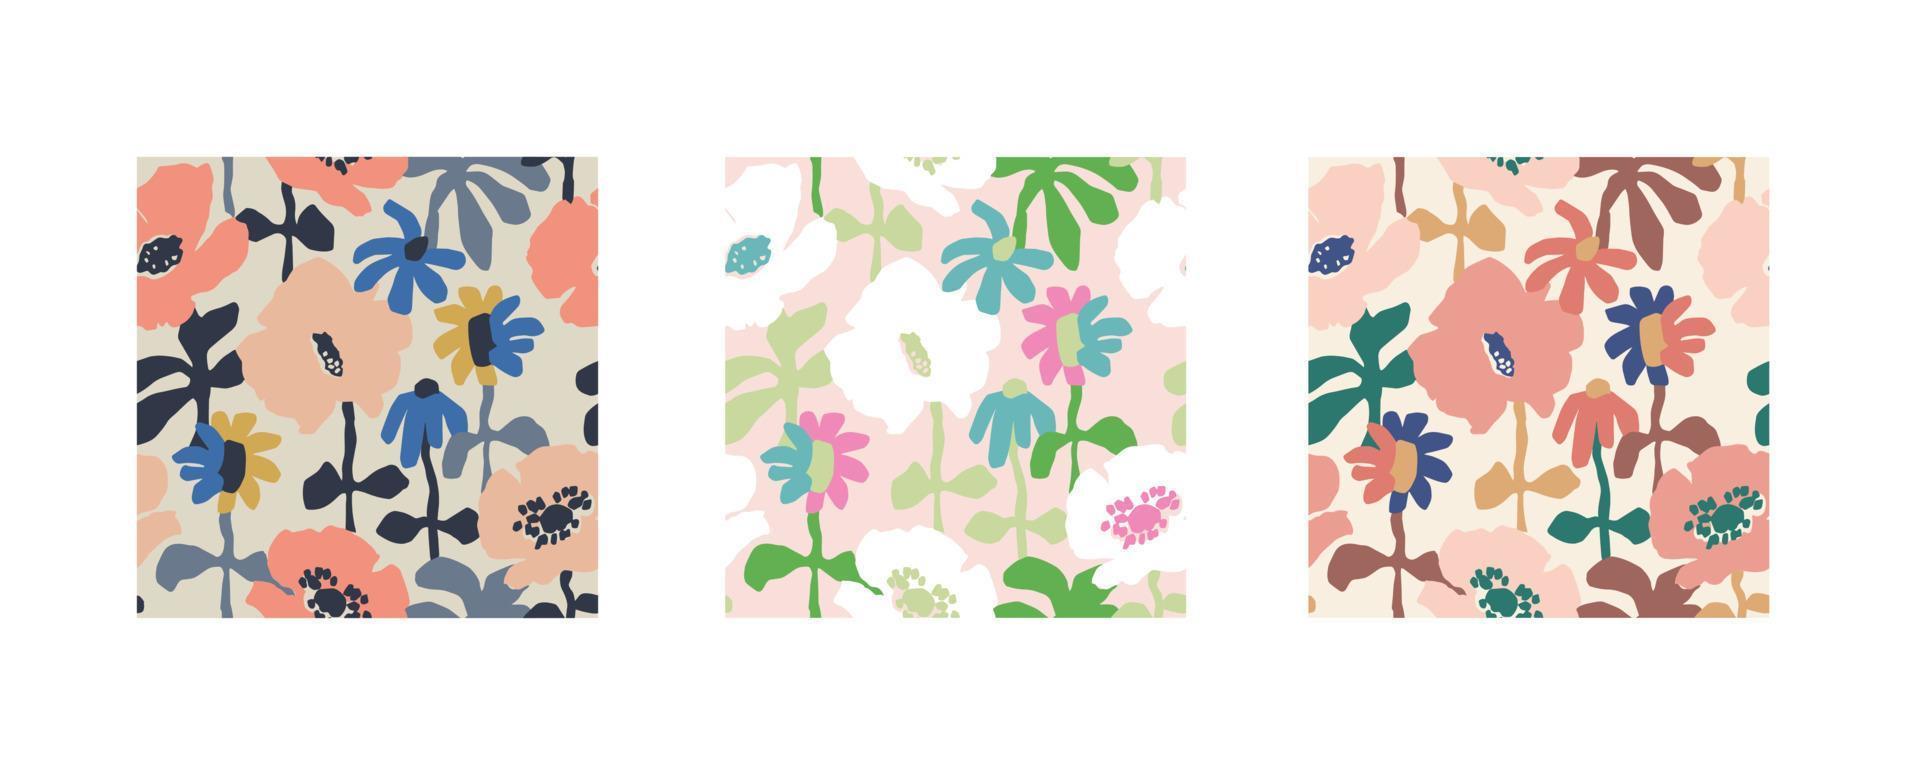 Vector hand-drawn abstract retro flower illustration seamless repeat pattern 3 color ways set